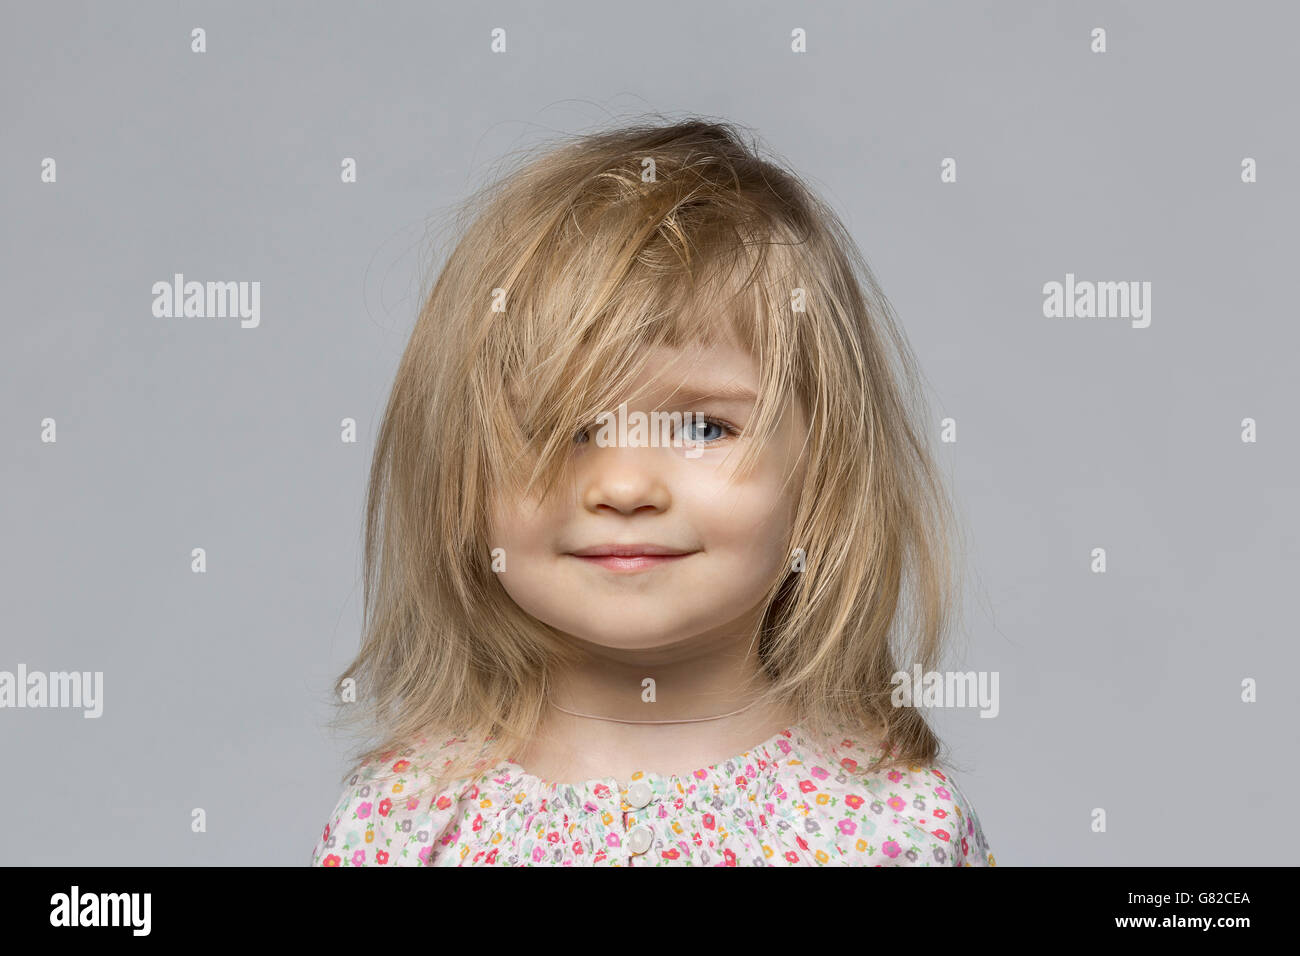 Portrait of smiling girl with tousled hair against gray background Stock Photo